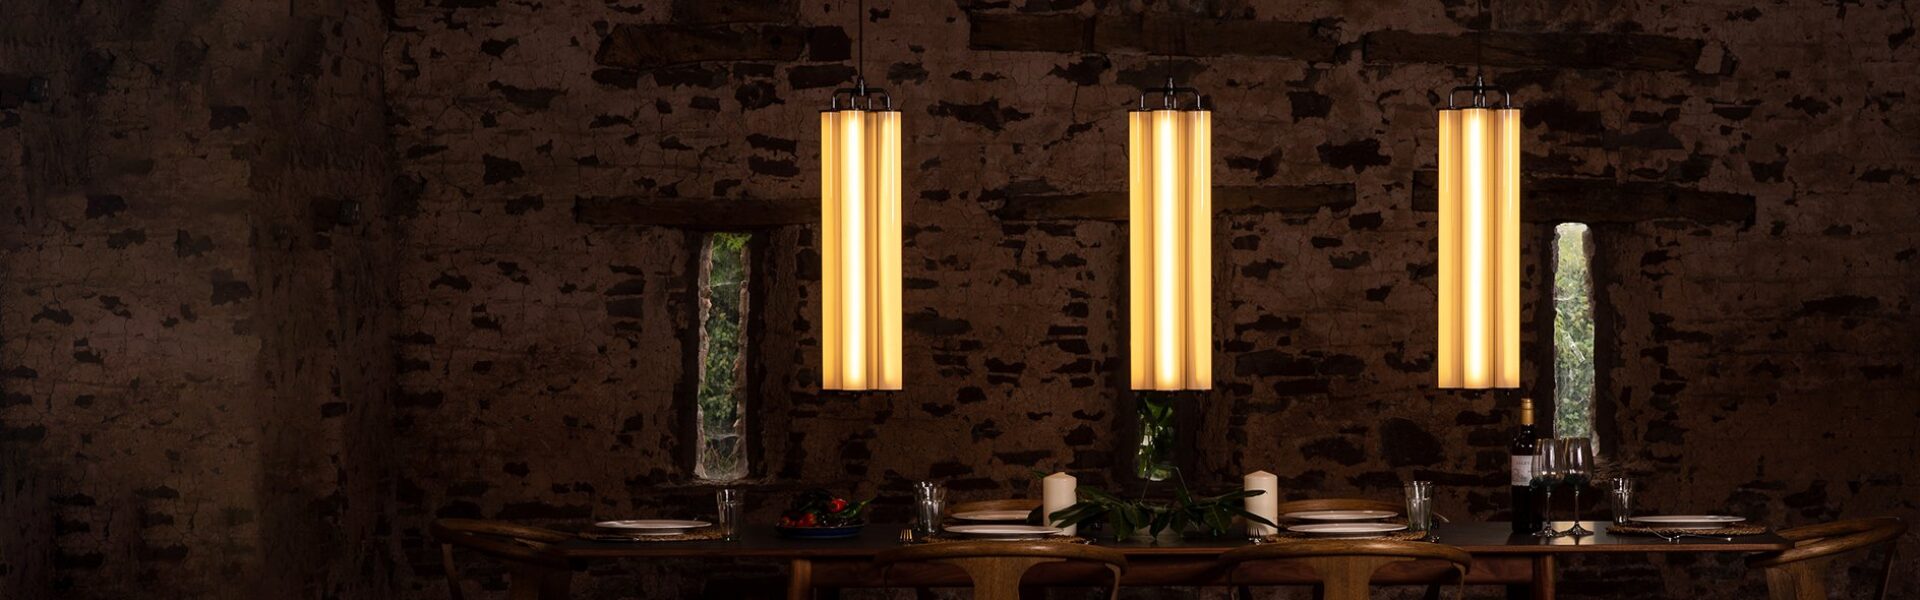 Fritz Fryer Pendant Lights hung in a row over a large dinning table. The pendants each feature 4 light tubes held together with brass fixtures